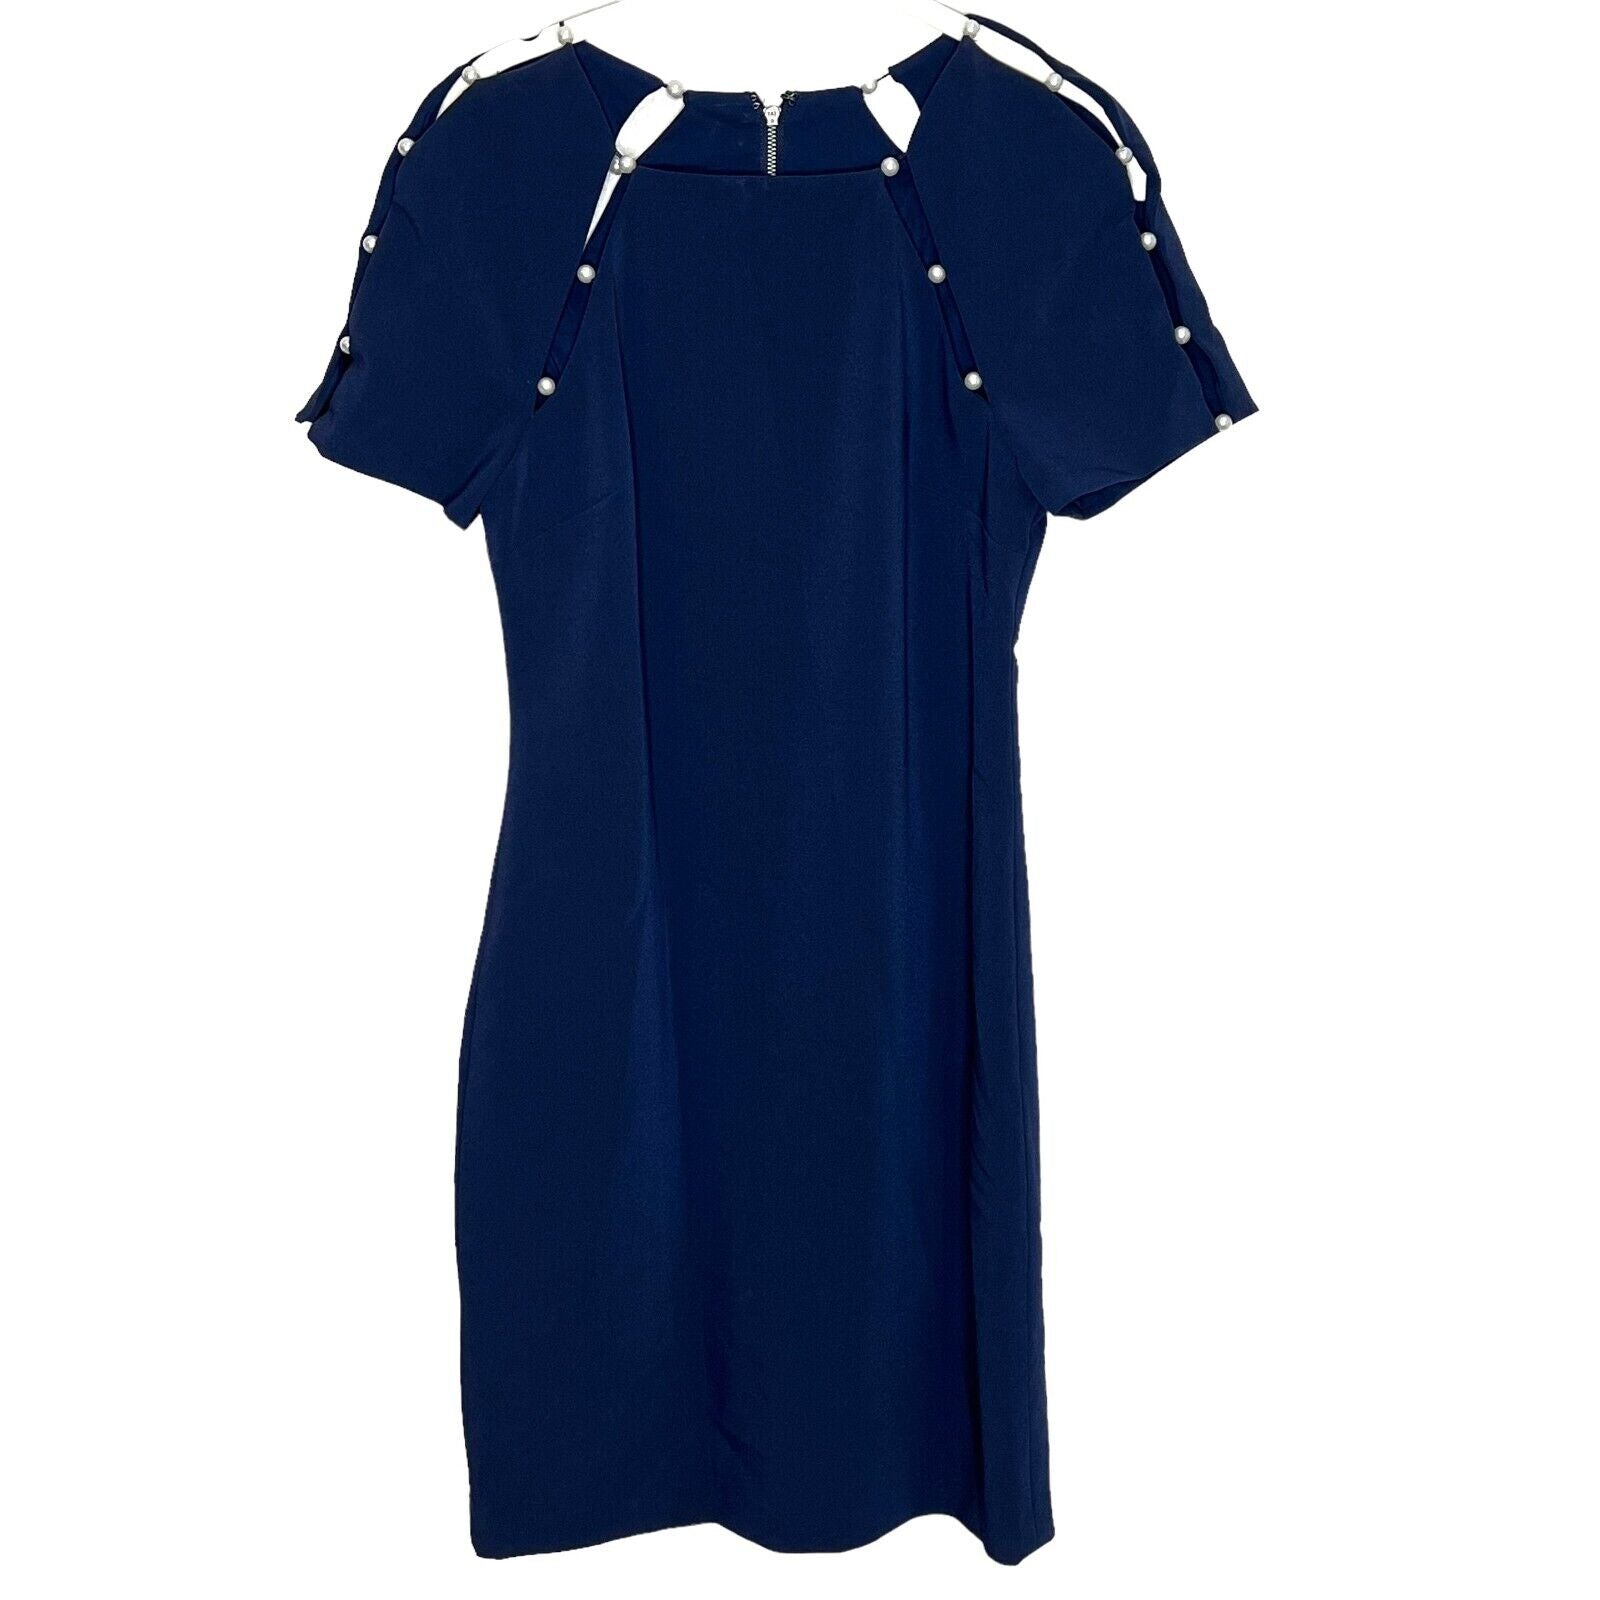 Alice+Olivia Navy Blue Kristiana Faux Pearl Cut Out Dress Size 6 NEW $330